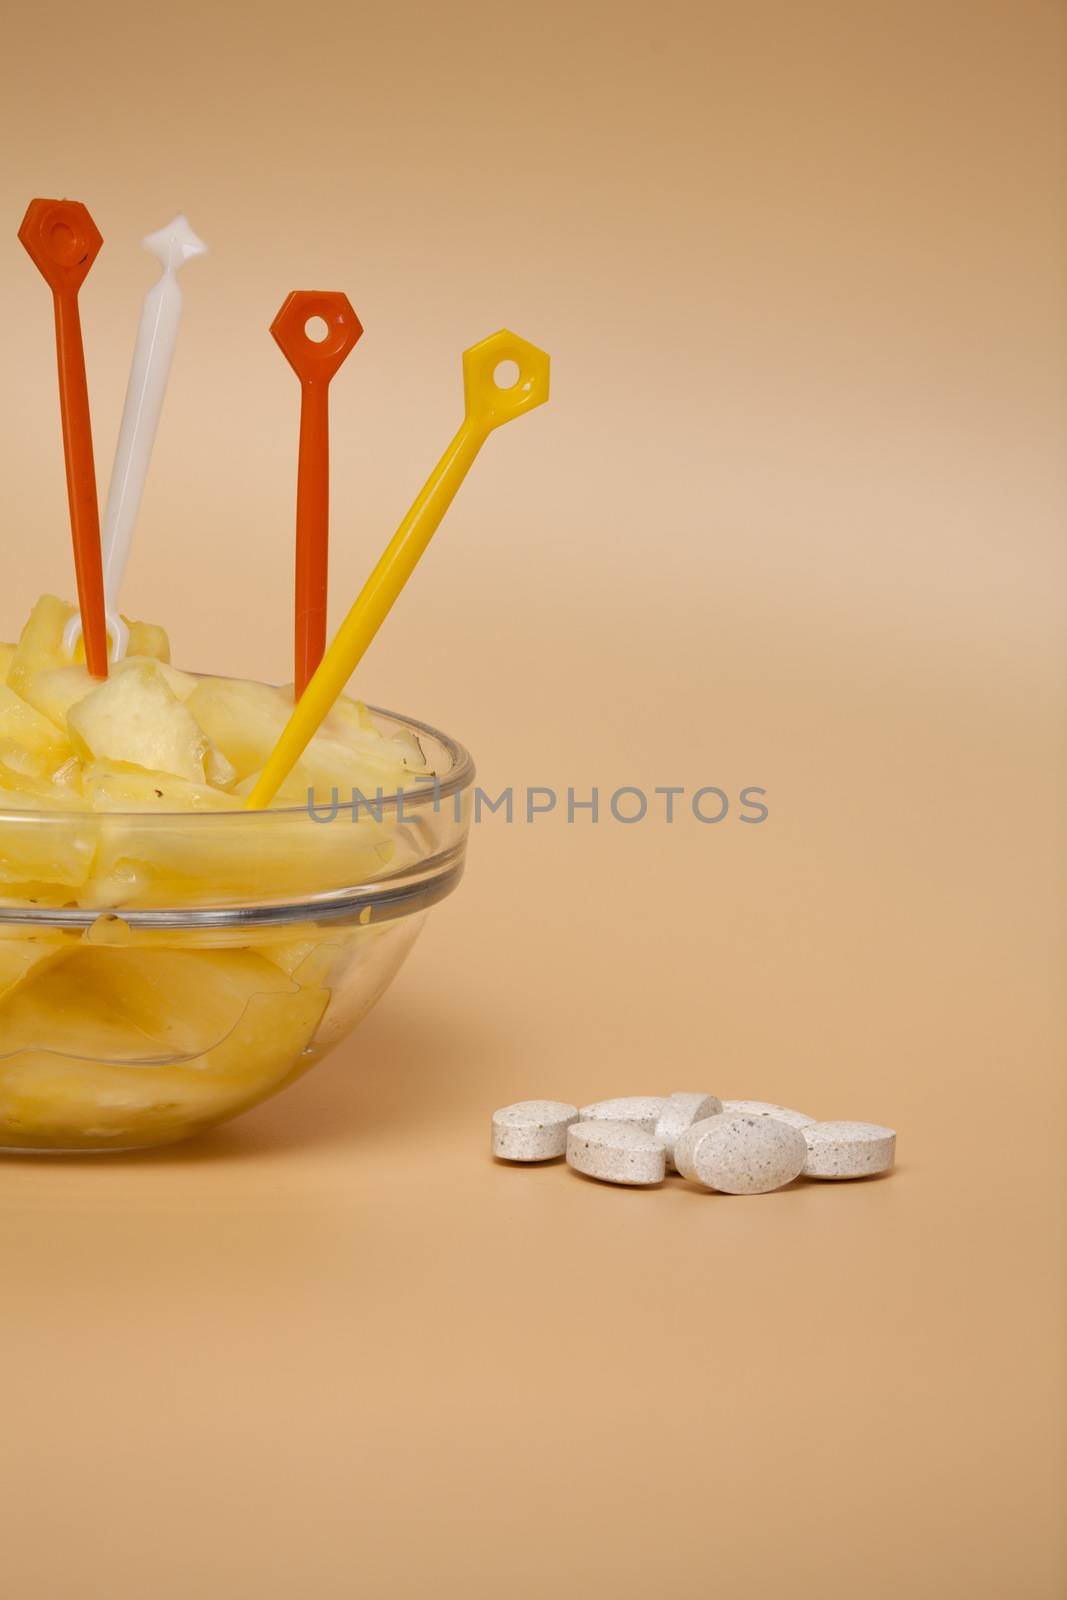 cup filled with pineapple slices handful of pills concept of healthy nutrition and prevention medicine